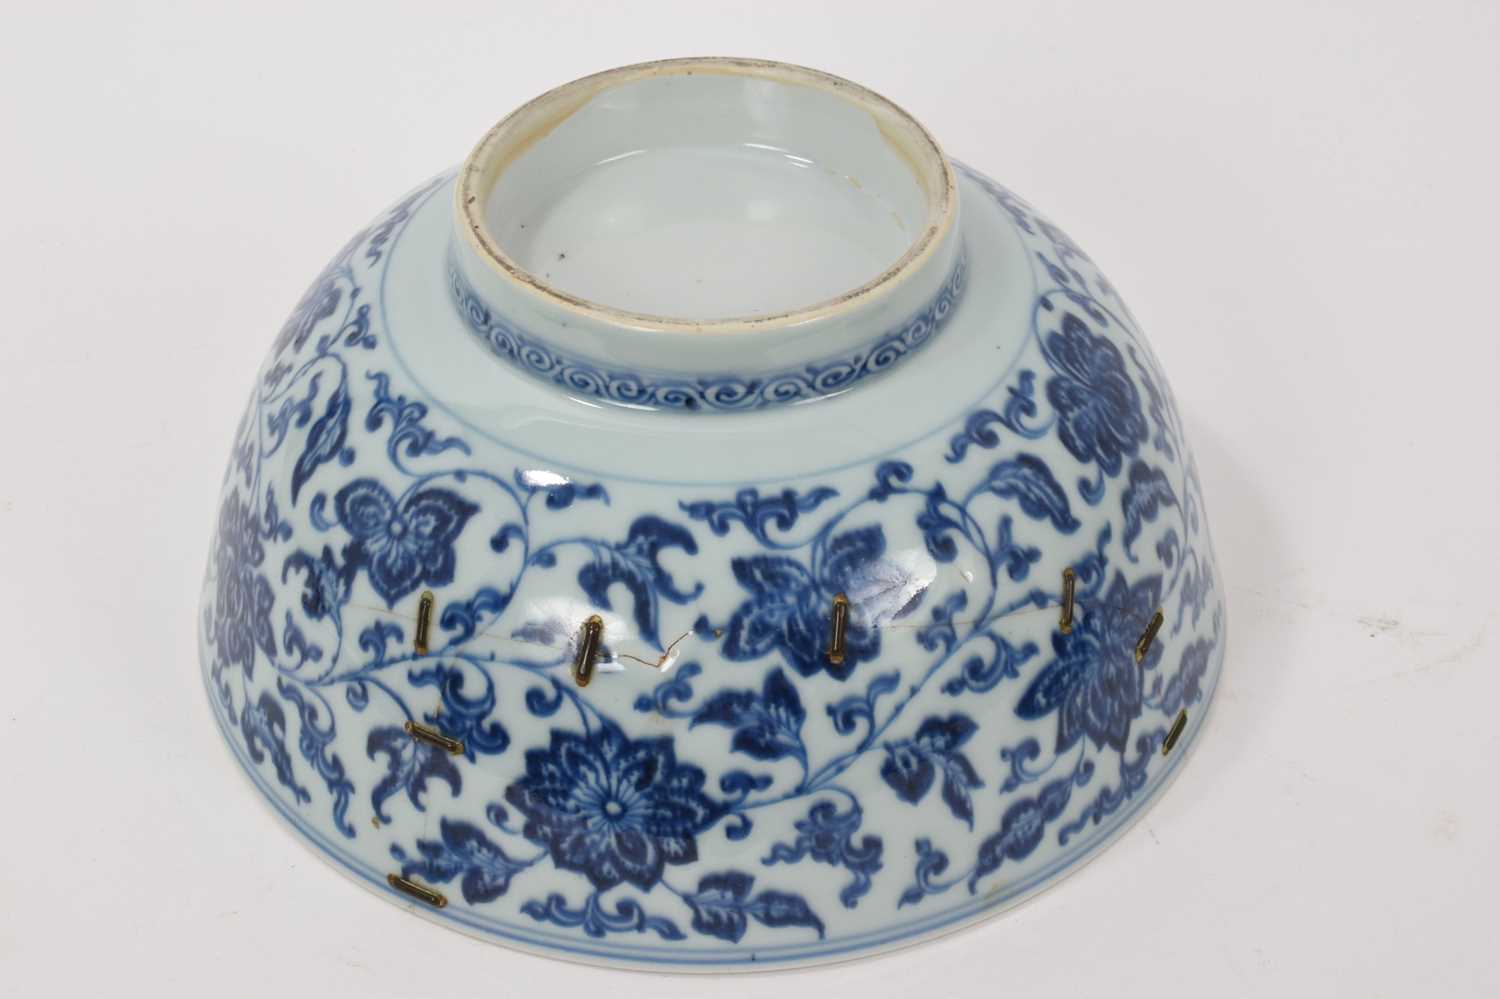 Antique Chinese porcelain blue and white and famille rose bowl (with wooden stand) - Image 4 of 7